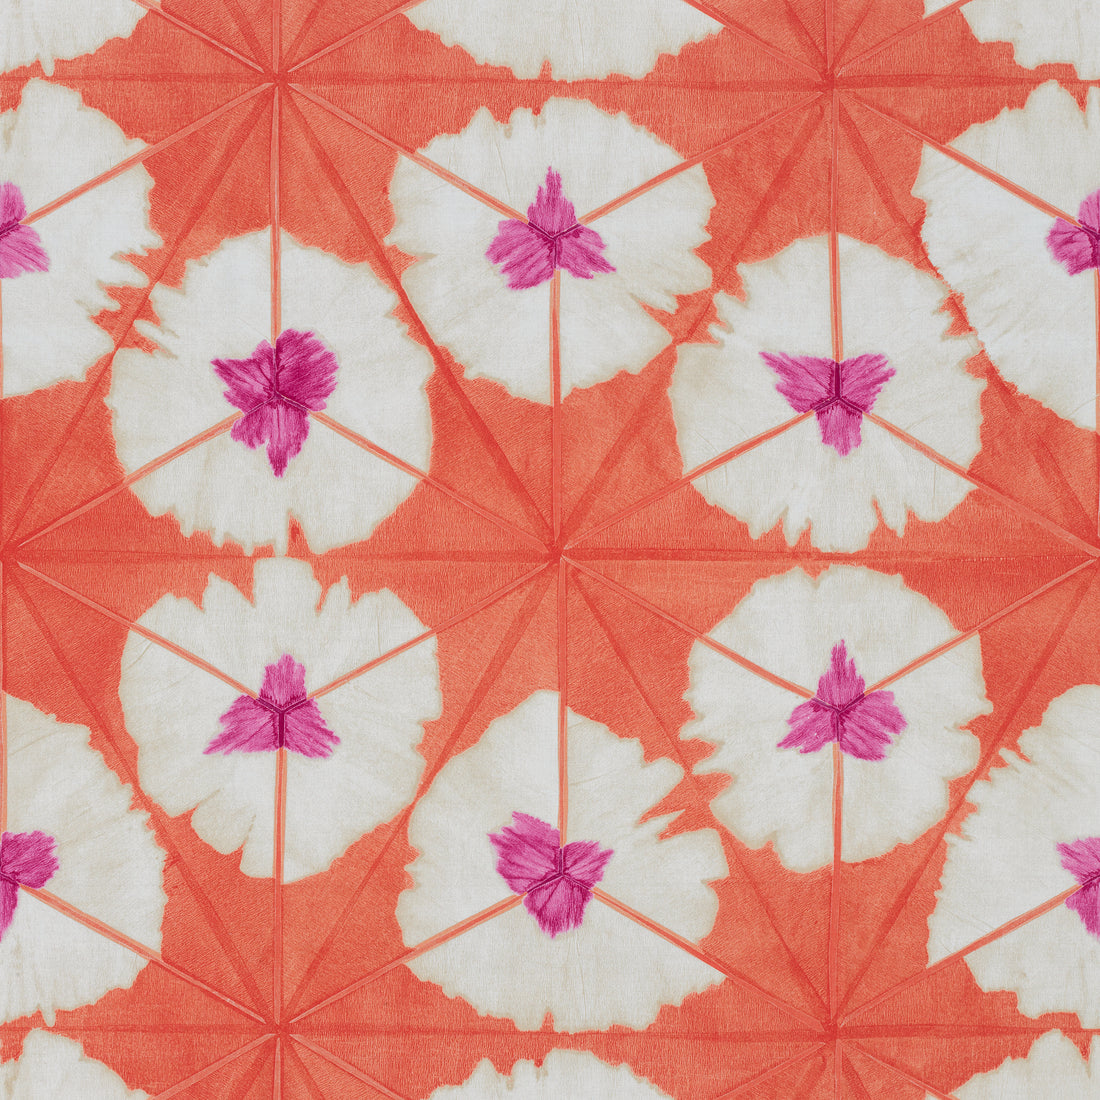 Sunburst fabric in pink and coral color - pattern number F913089 - by Thibaut in the Summer House collection